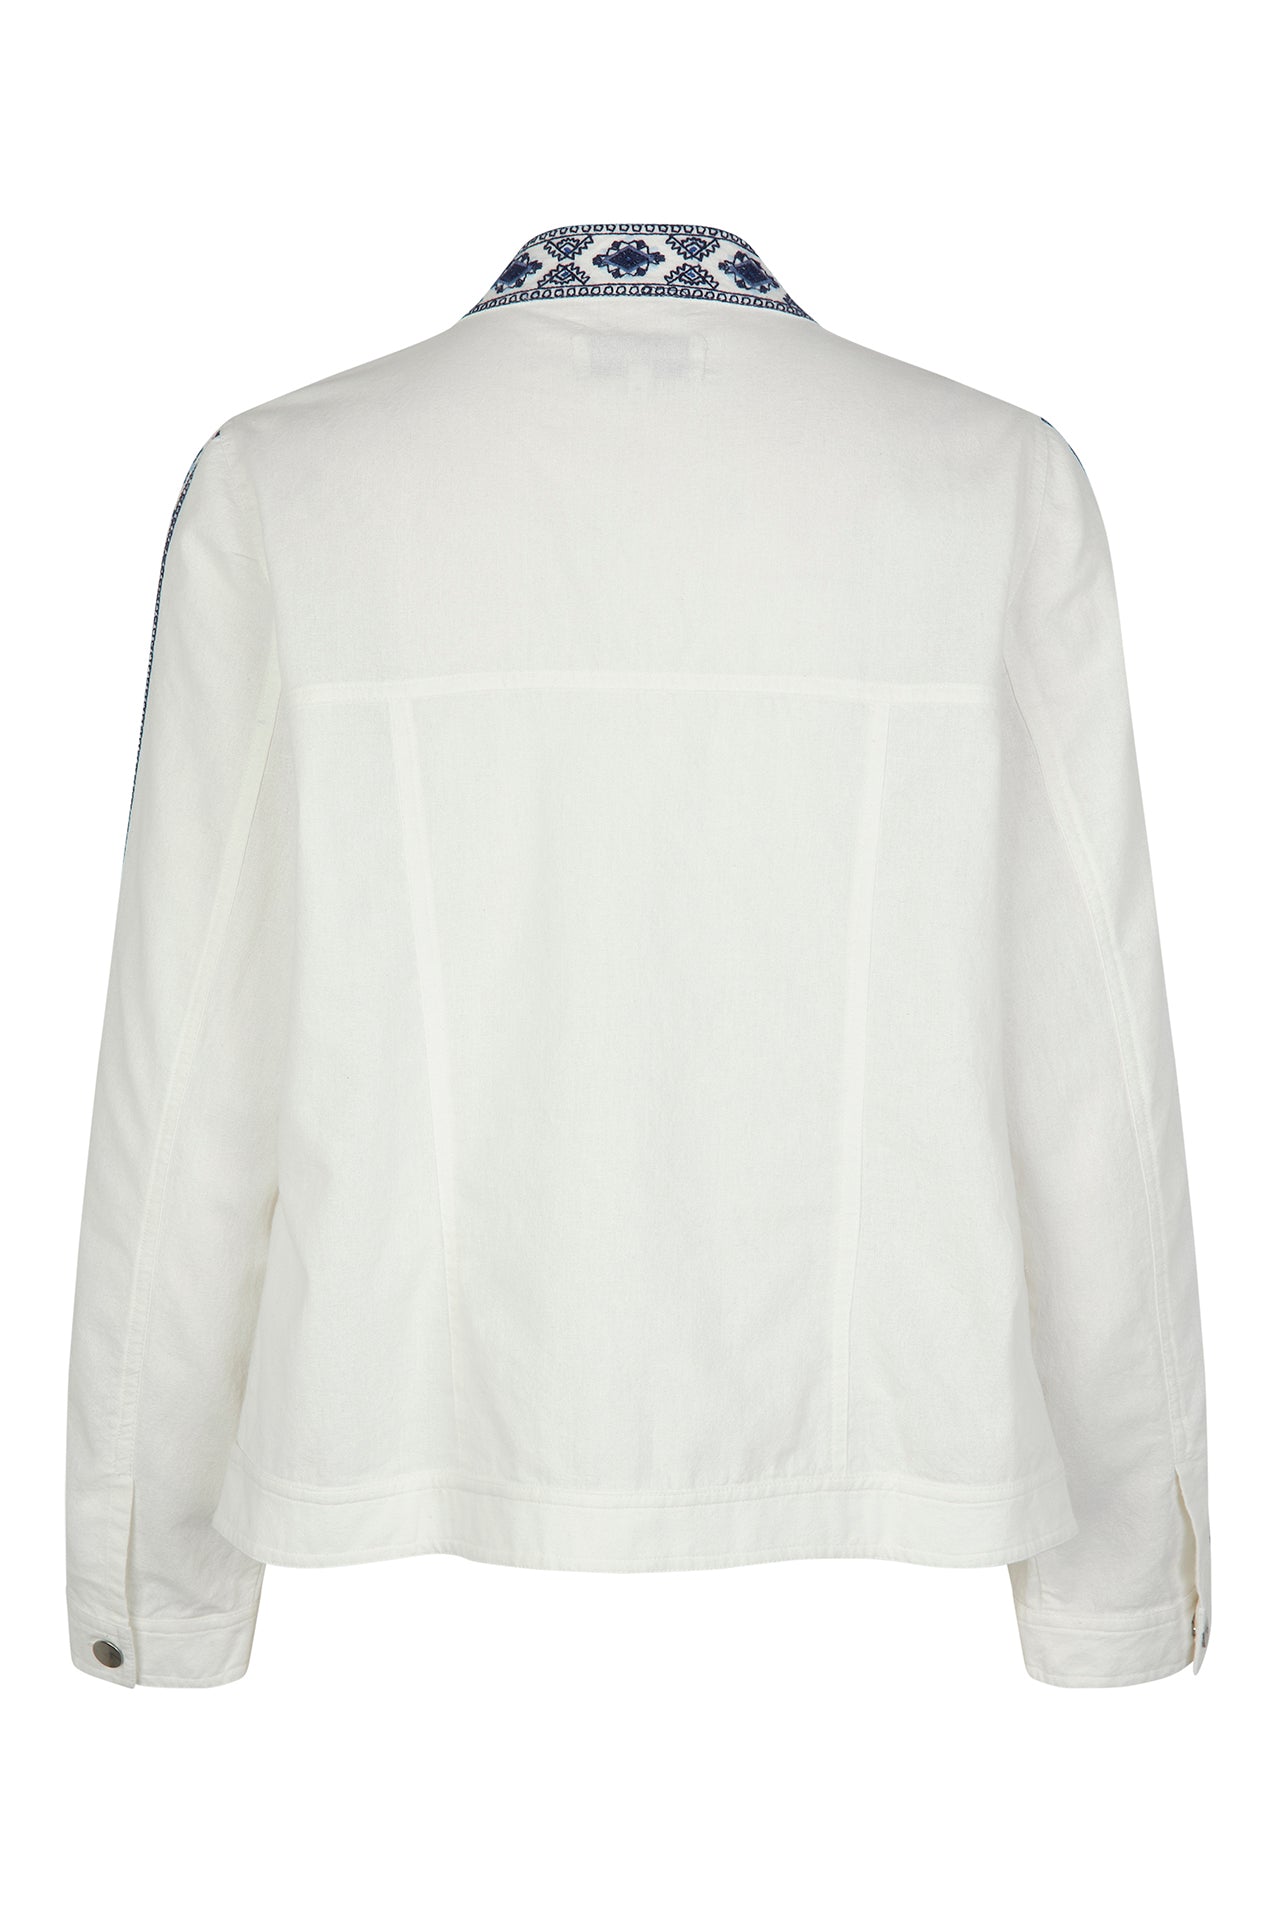 Lollys Laundry CooperLL Jacket LS Jacket 01 White